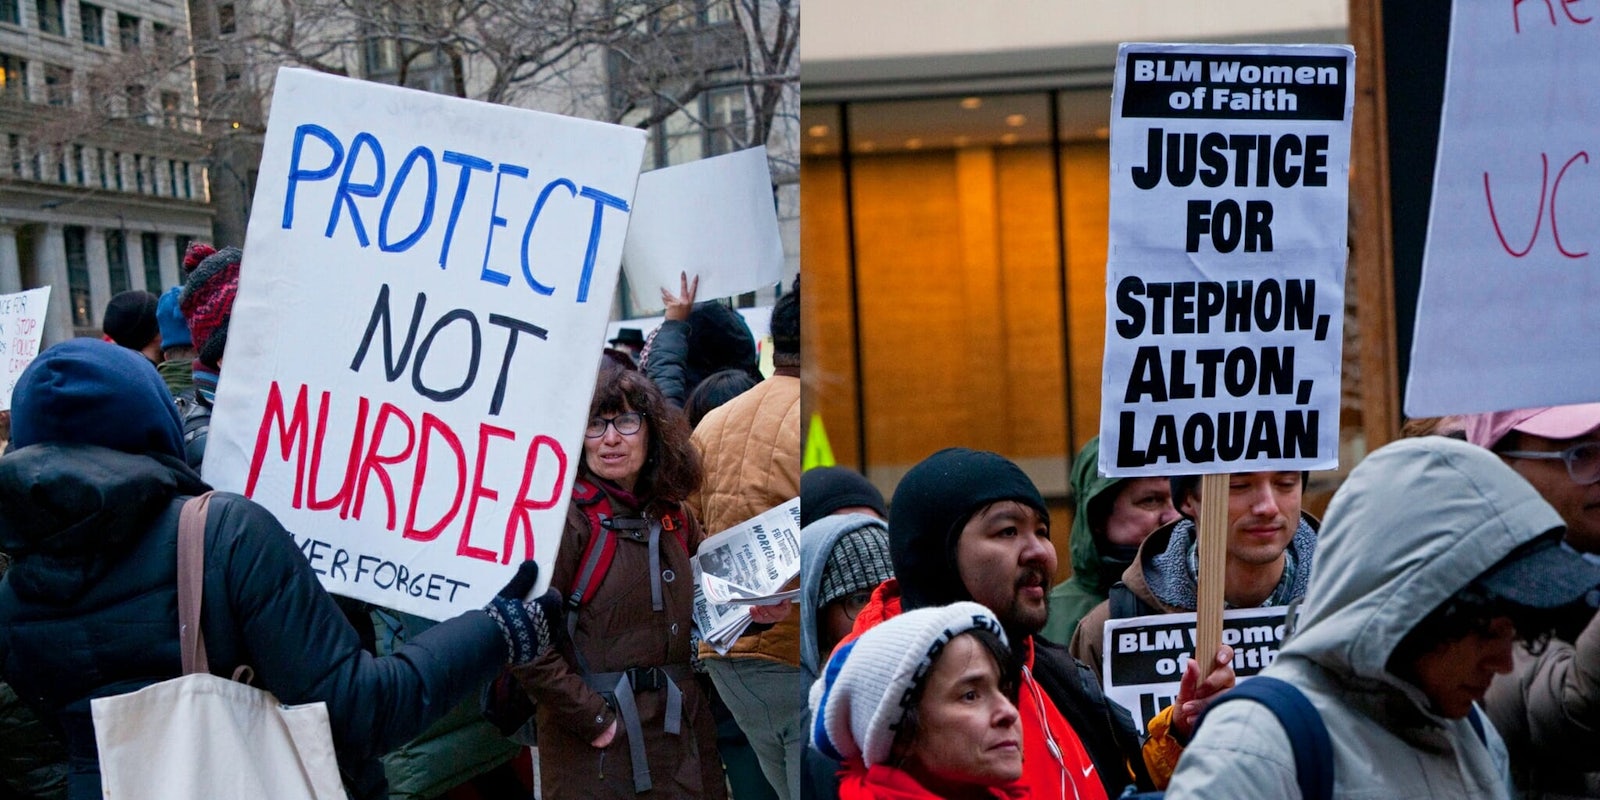 Protesters demand justice for Black men fatally shot by police officers.